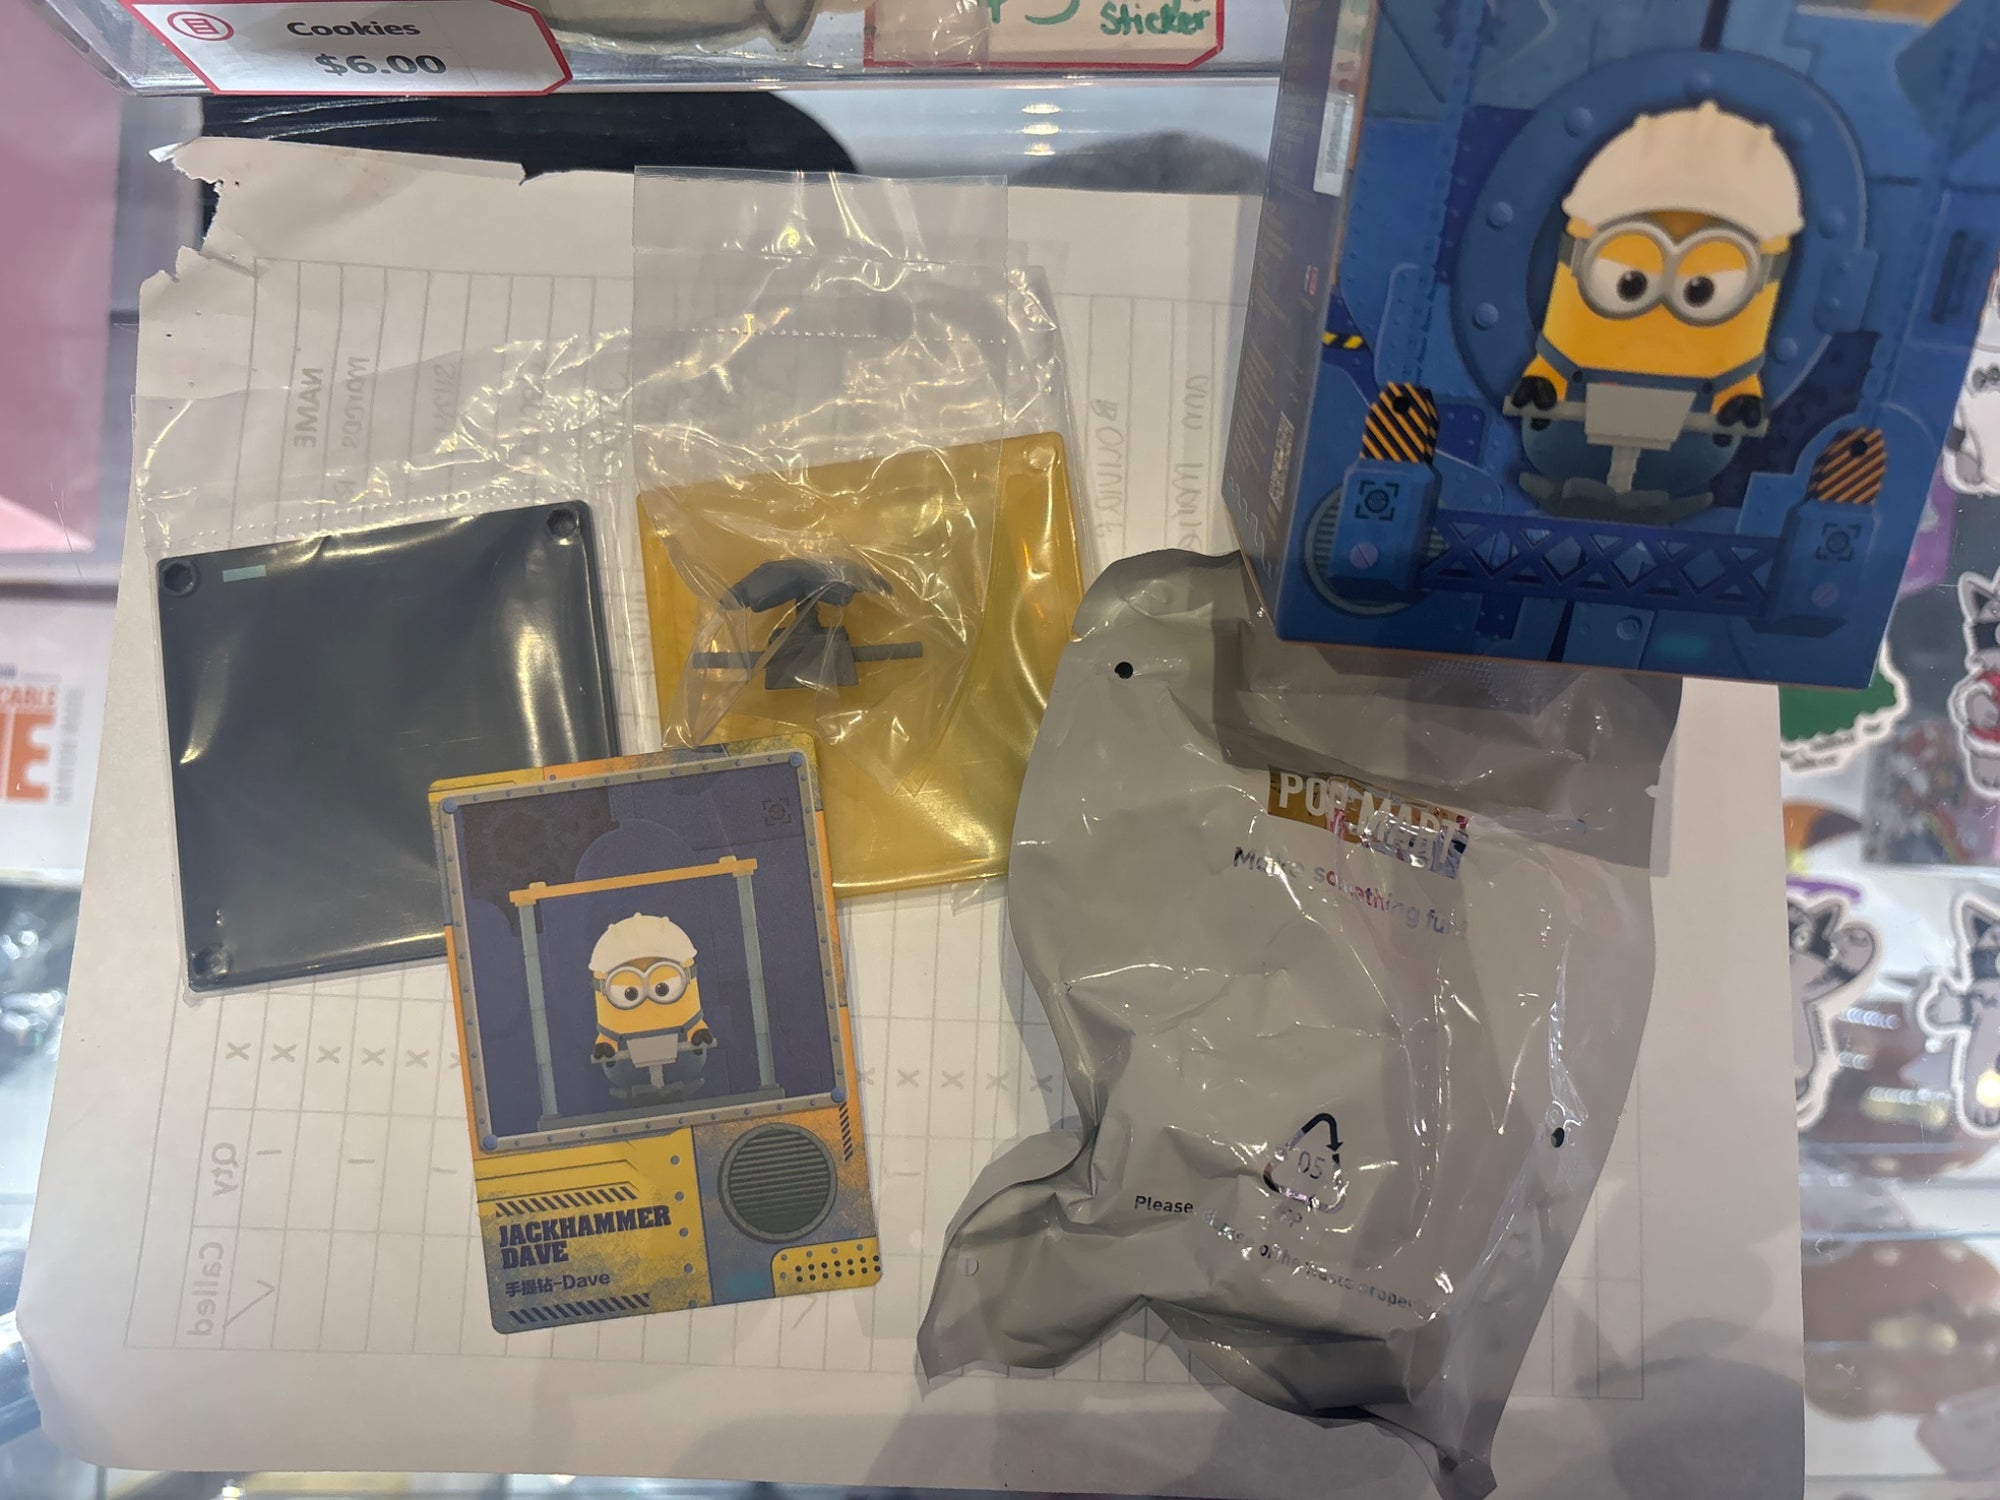 Jackhammer Dave - Minions at work Blind Box Series by POP MART - 1